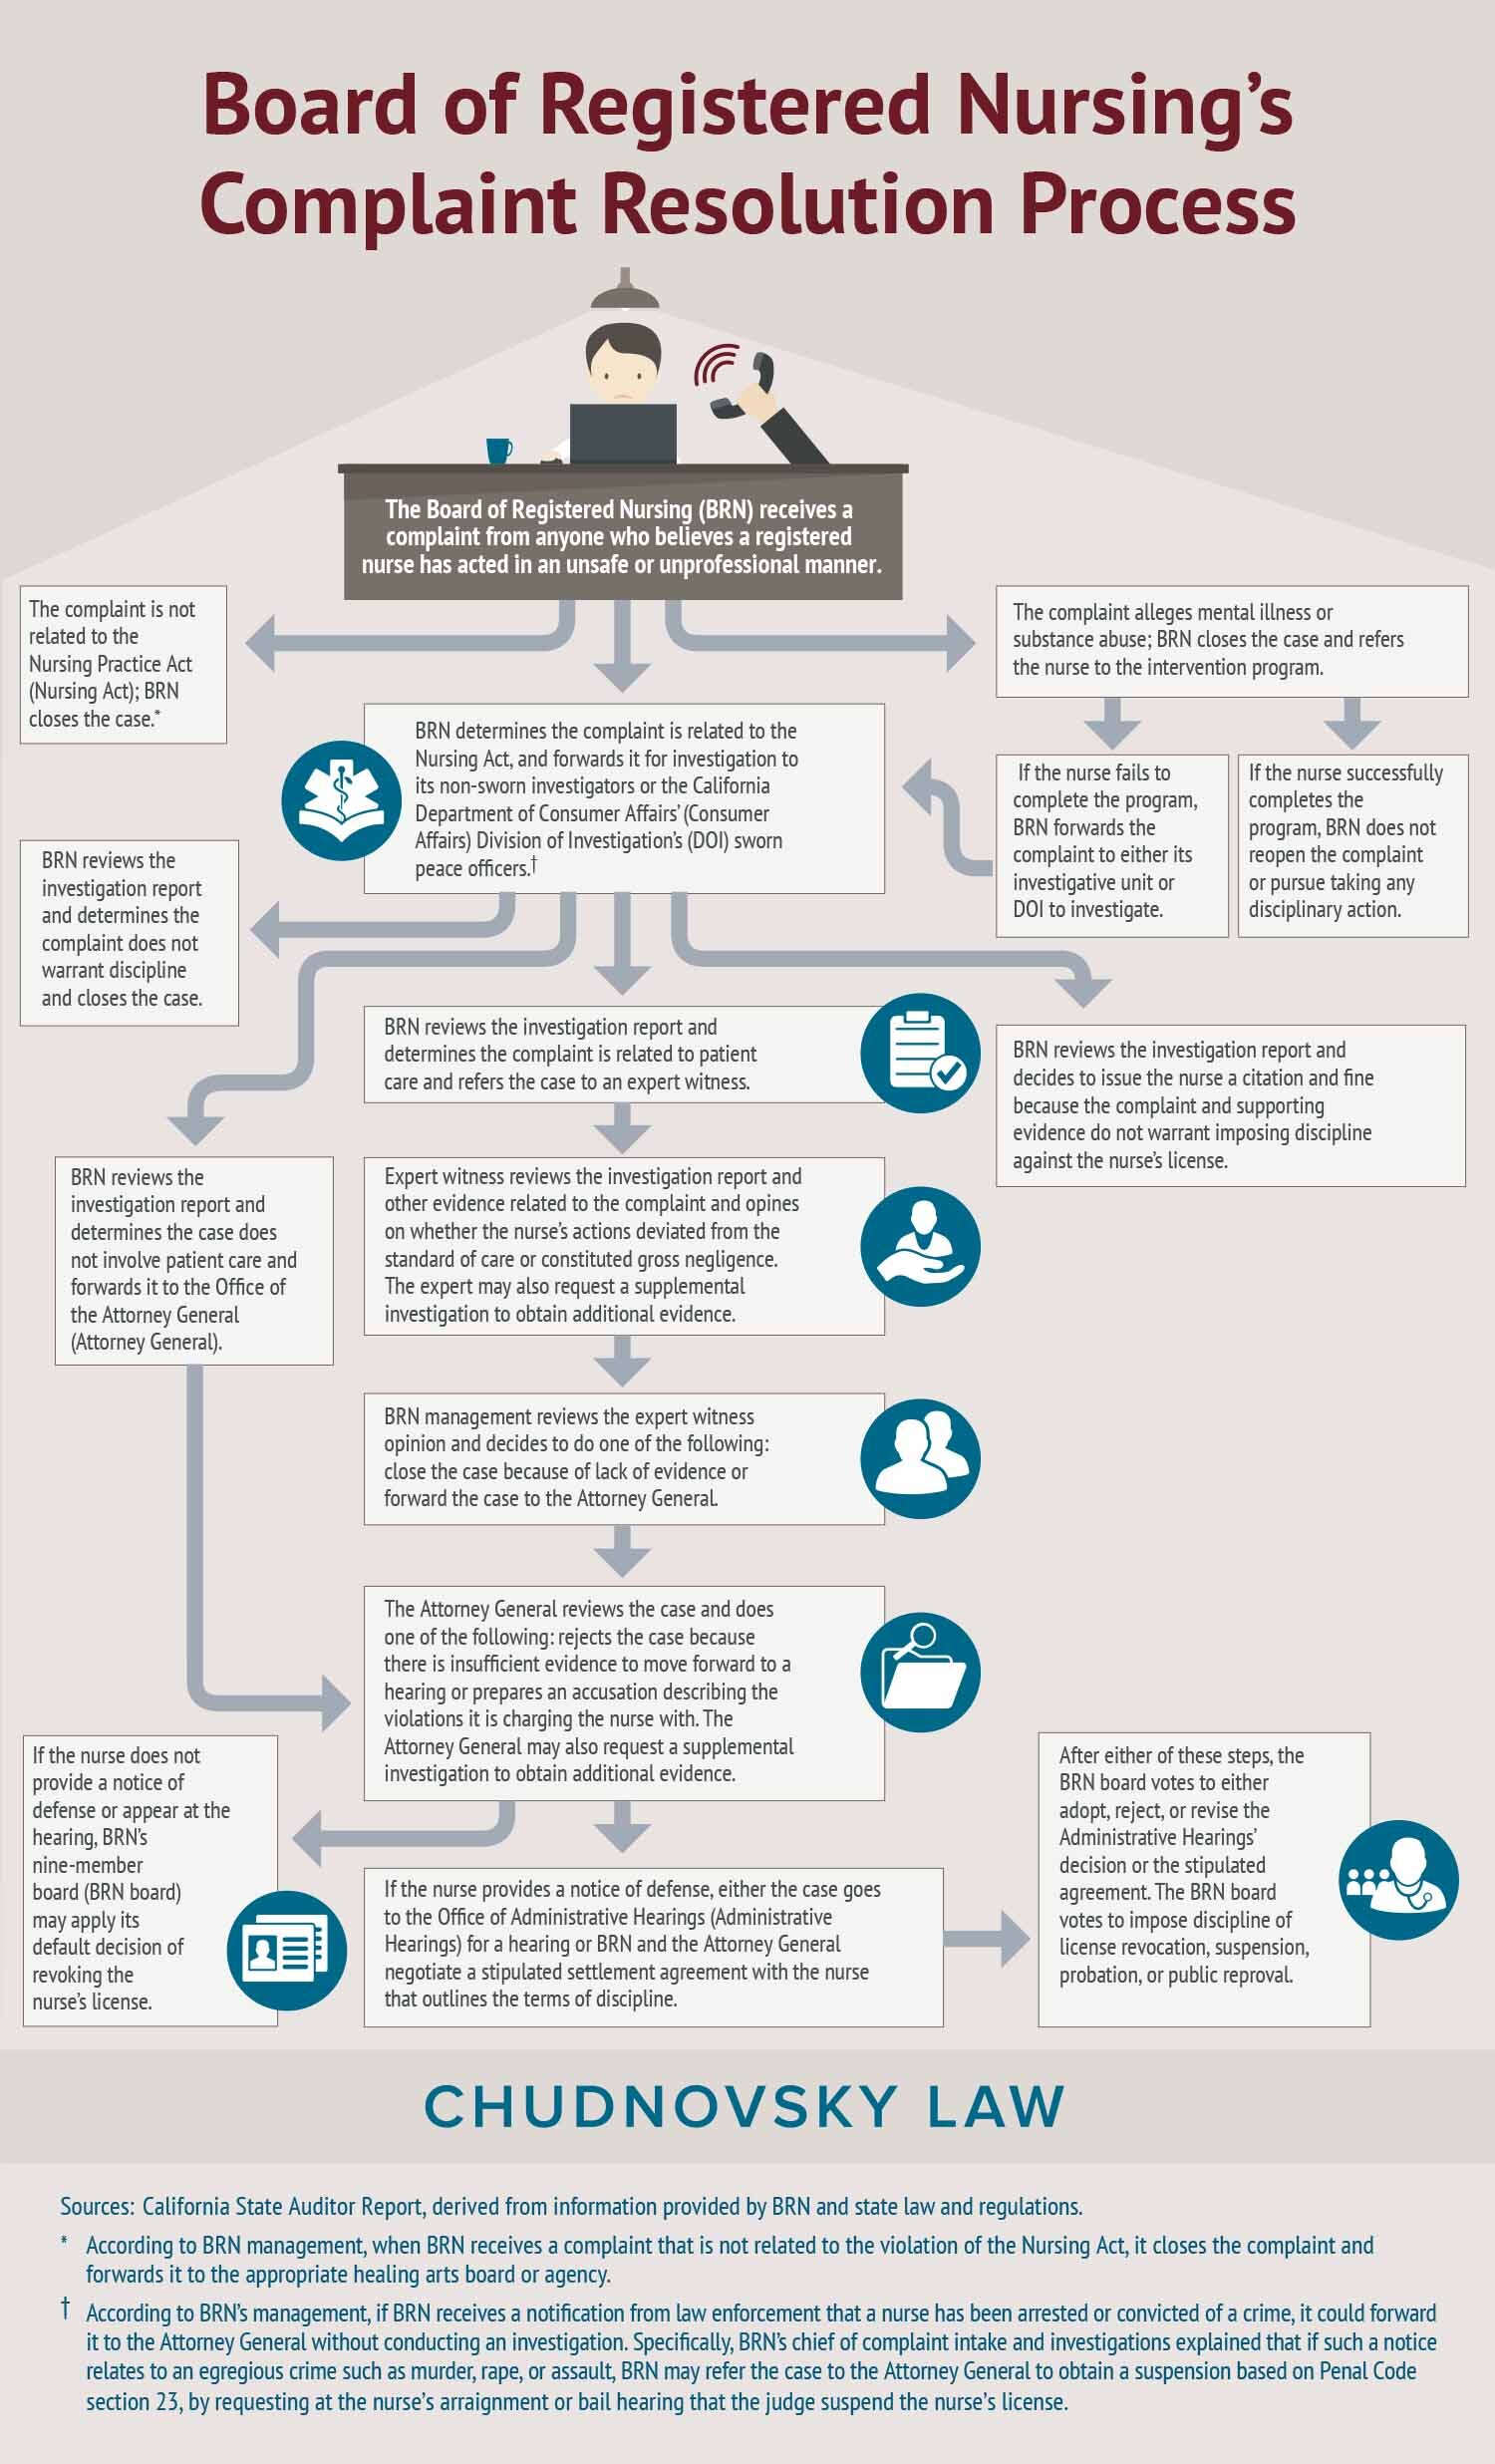 BRN Complaint Resolution Process - Infographic explaining the steps in the BRN nurse complaint resolution process.